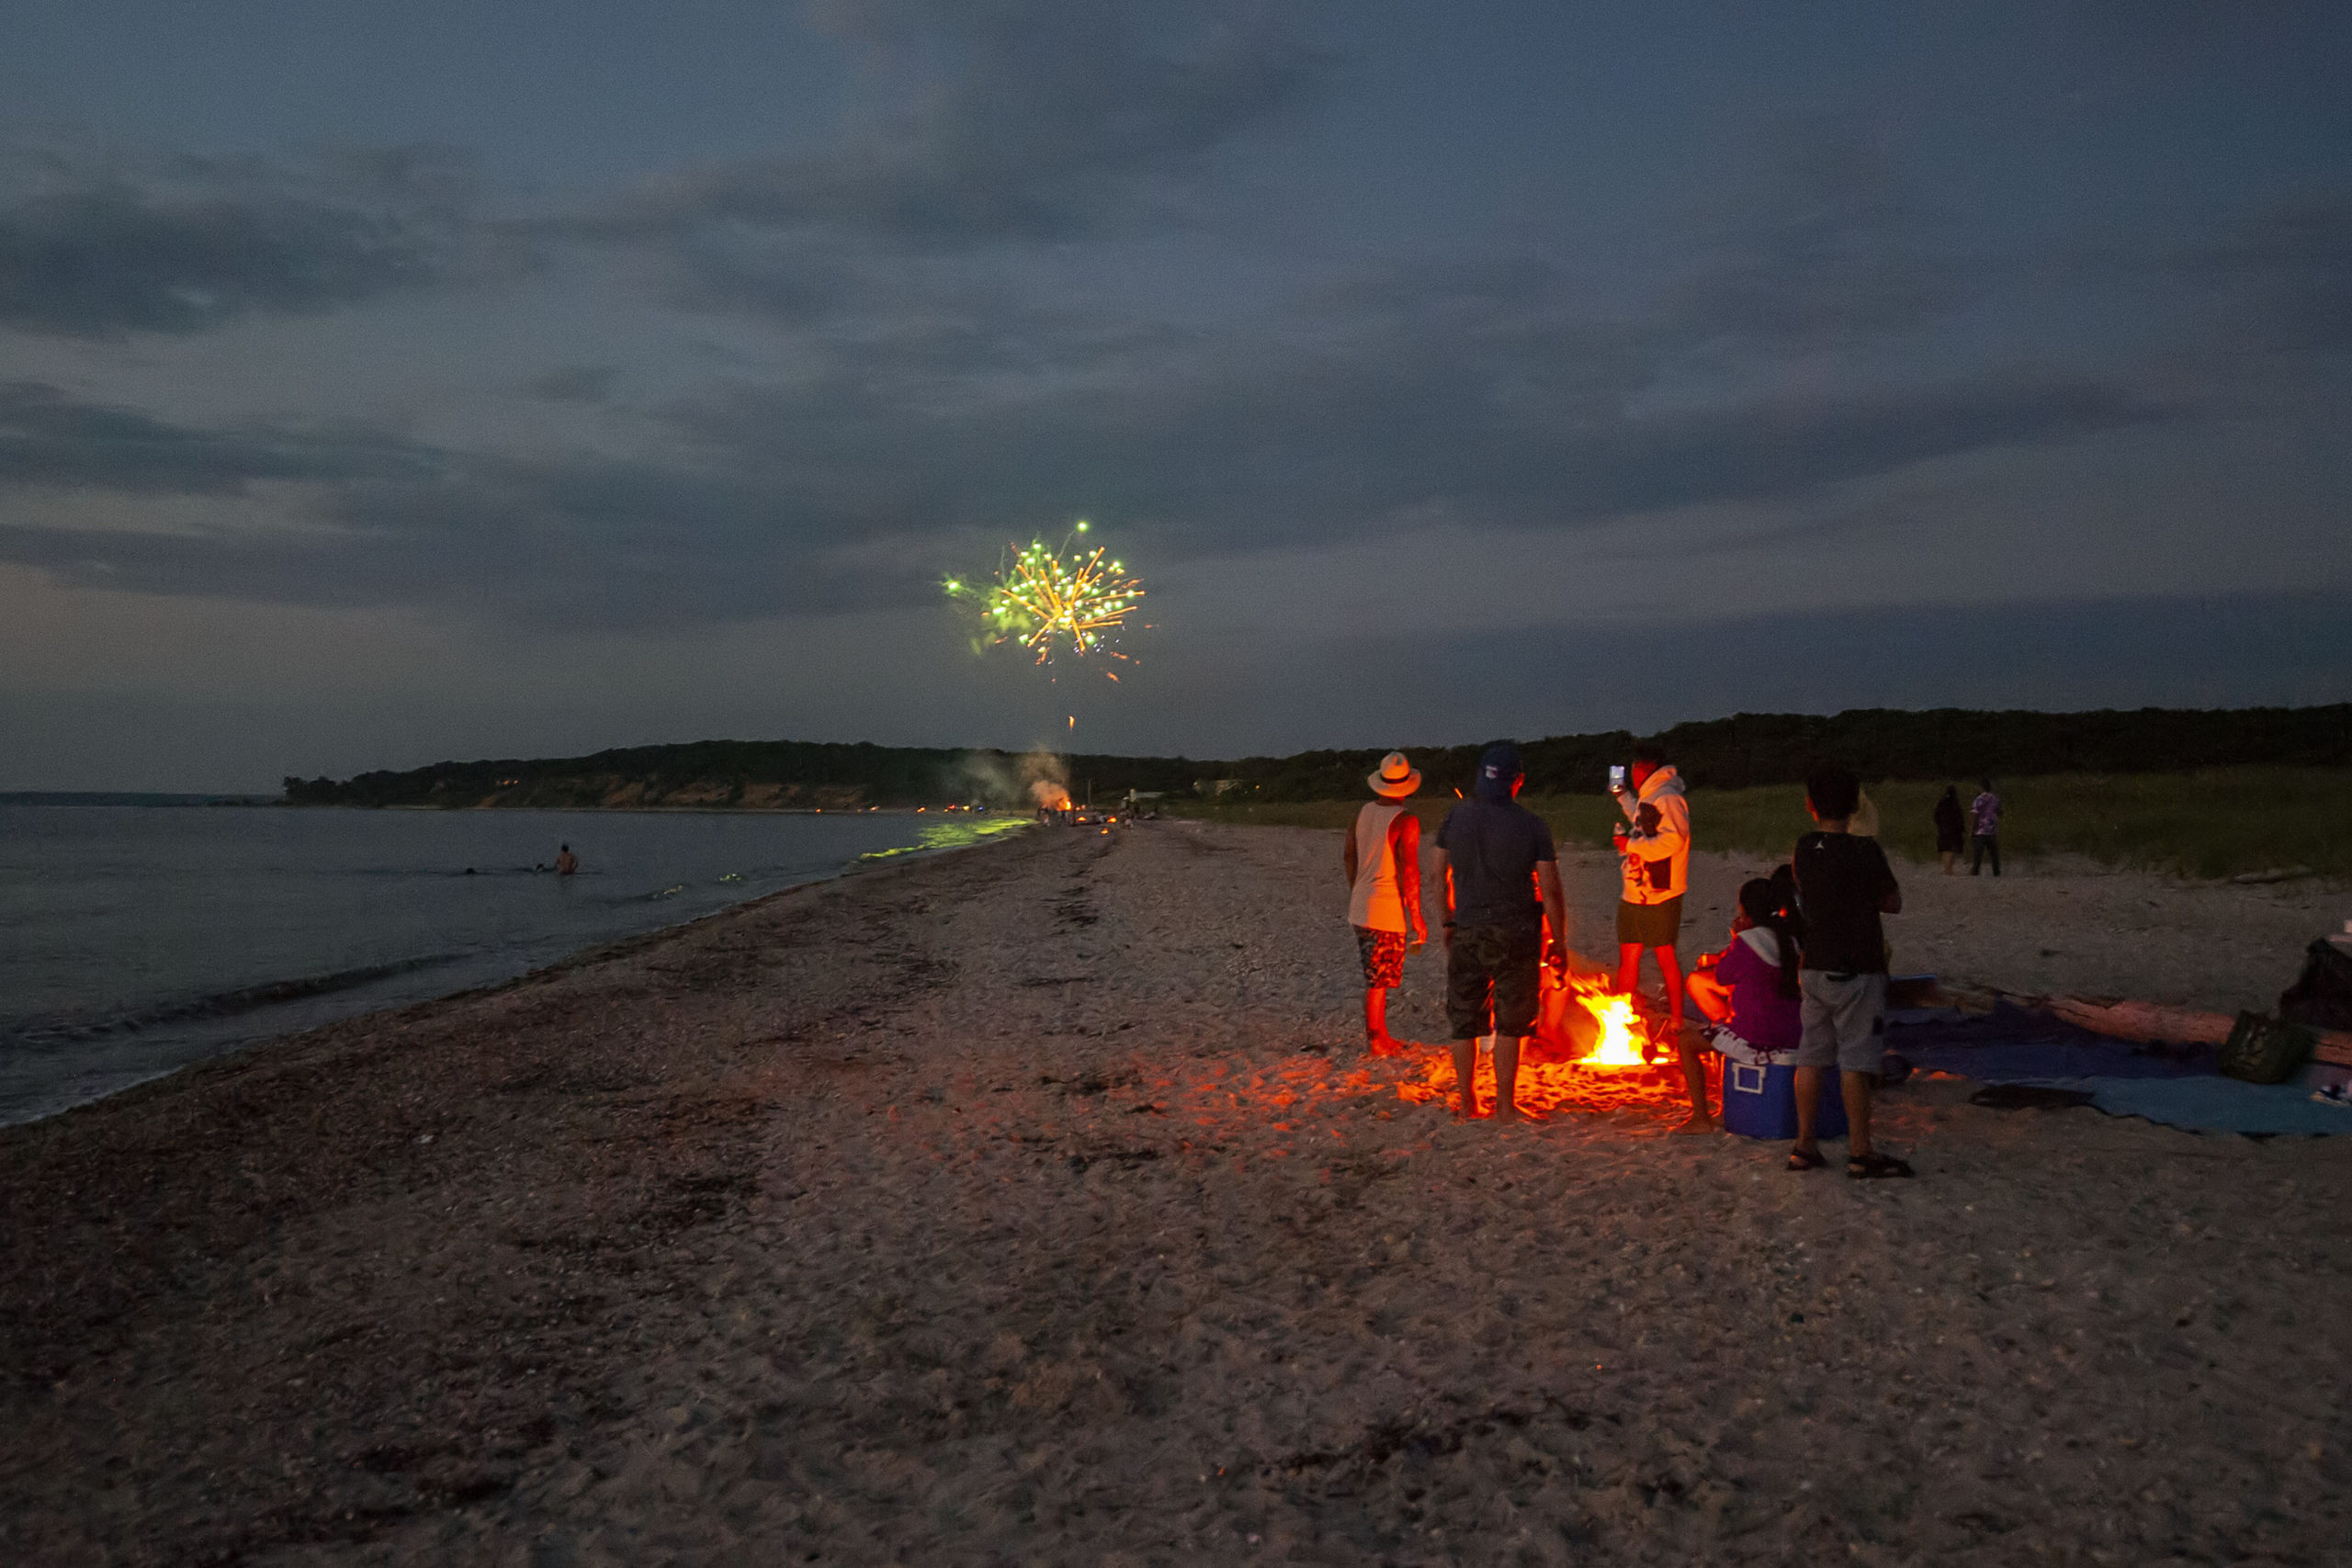 A family watches from around their campfire as another party sets off their own fireworks on the beach as part of a July 4th celebration as the sun goes down at Maidstone Park Beach on Saturday evening.    MICHAEL HELLER